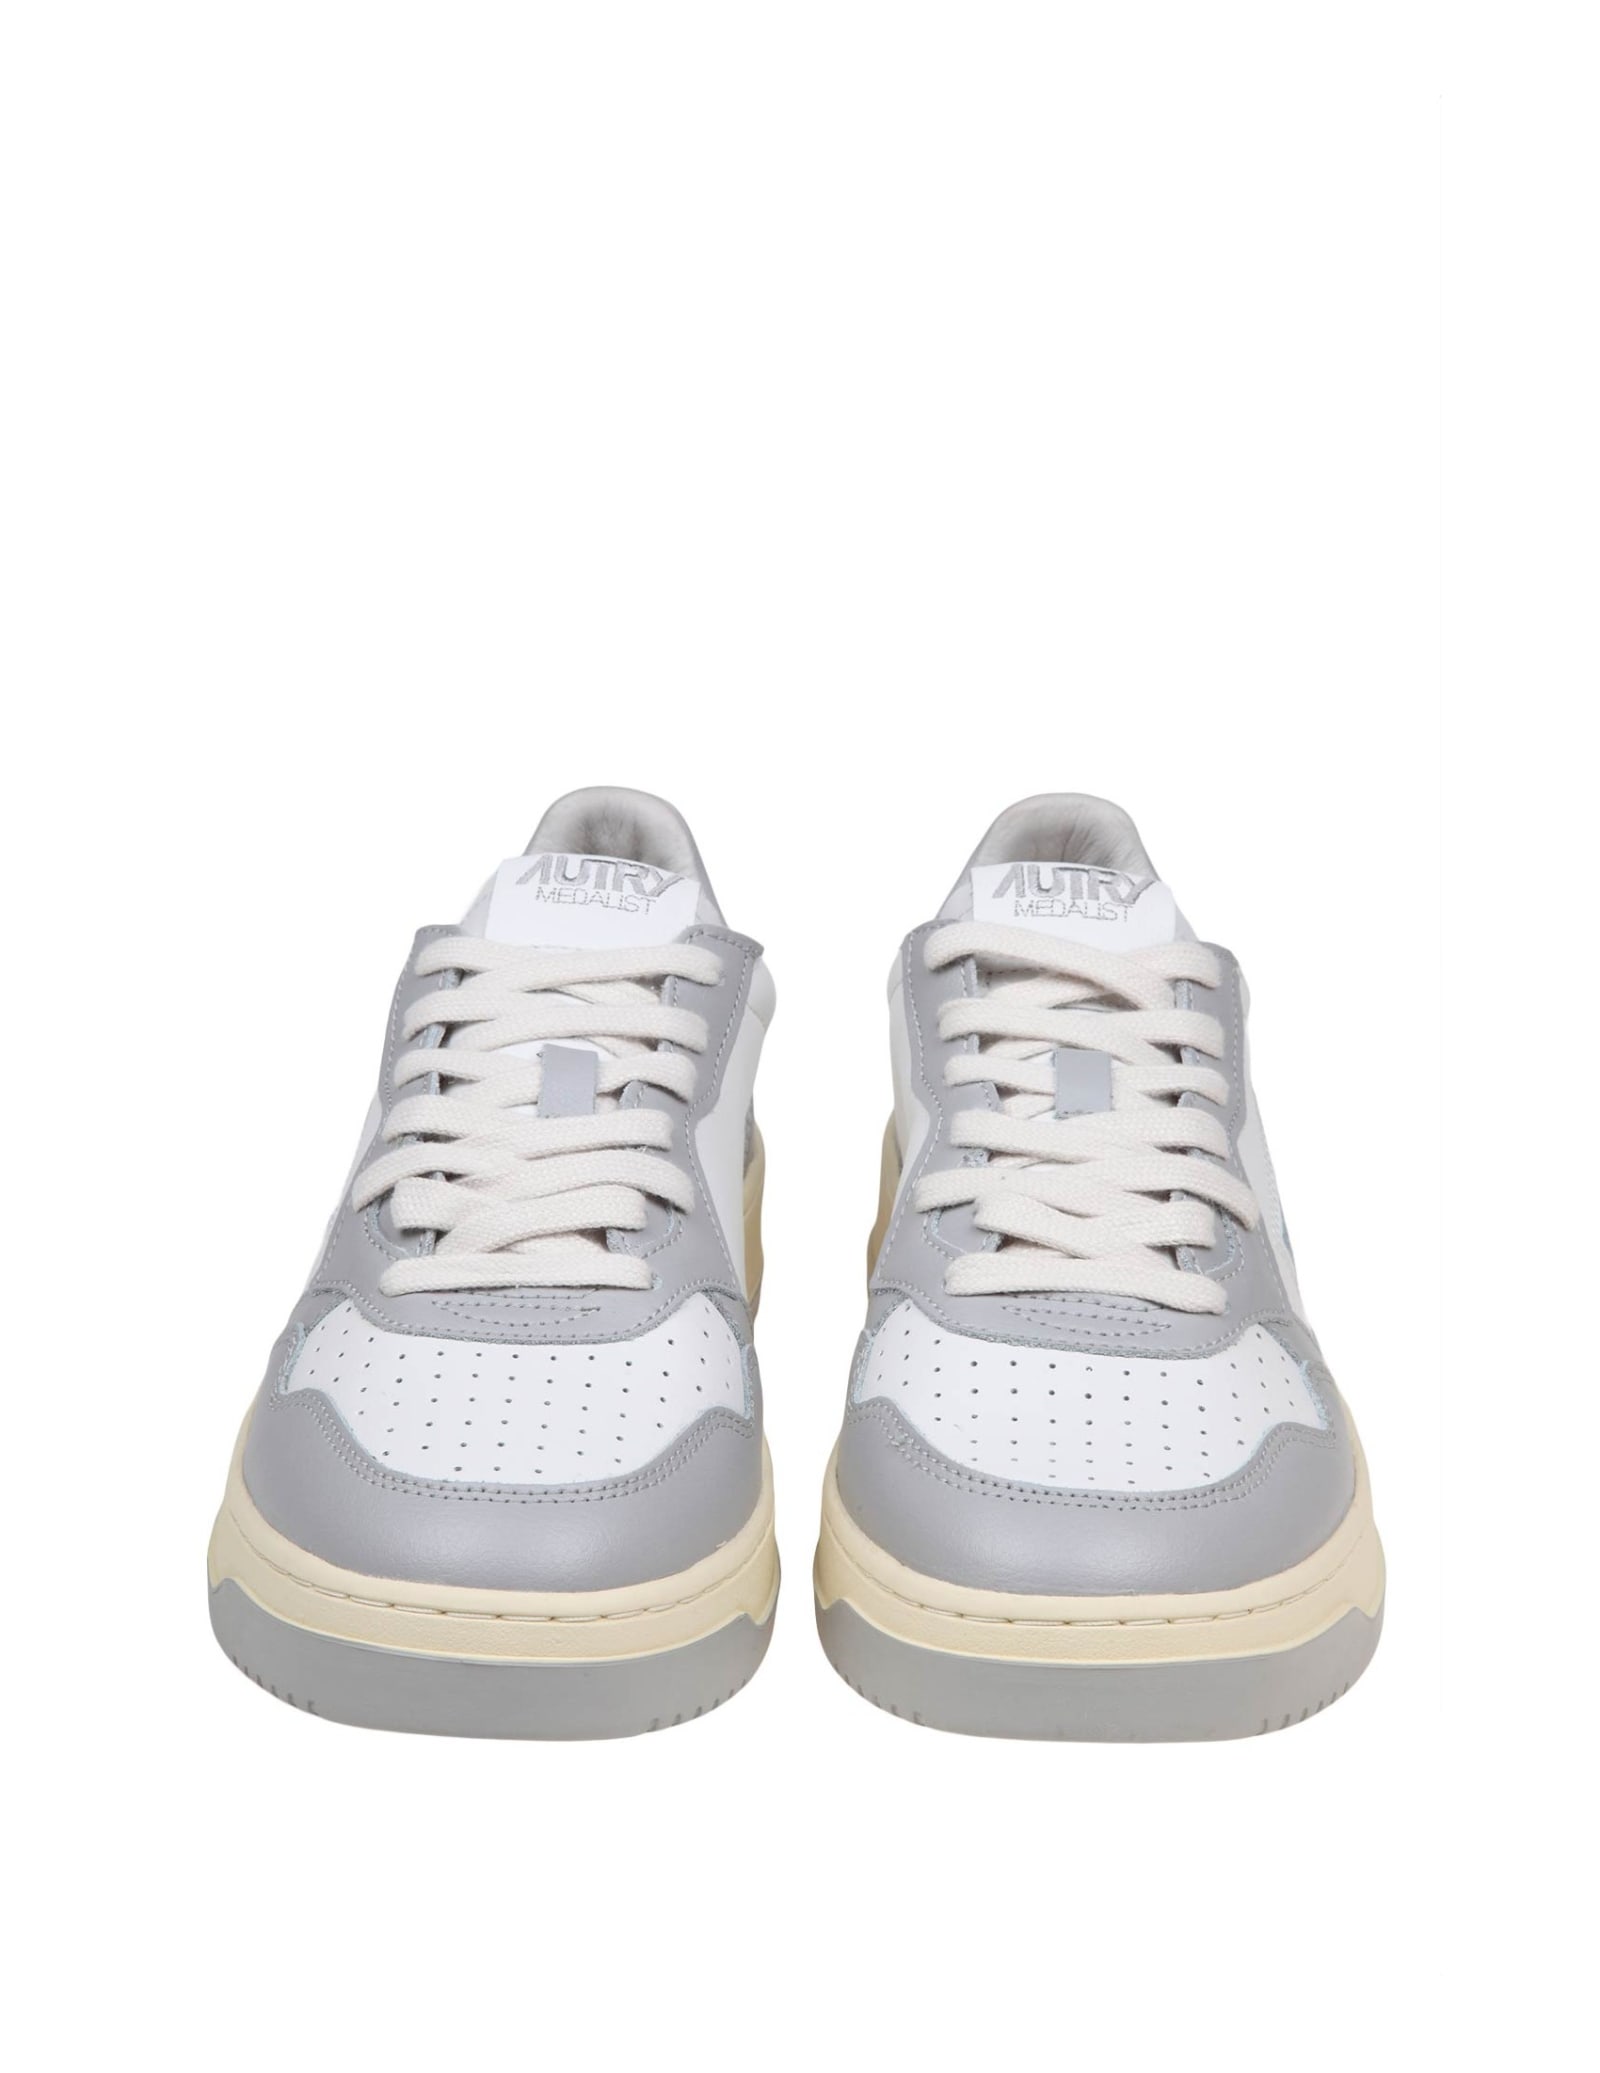 Shop Autry Sneakers In White And Gray Leather